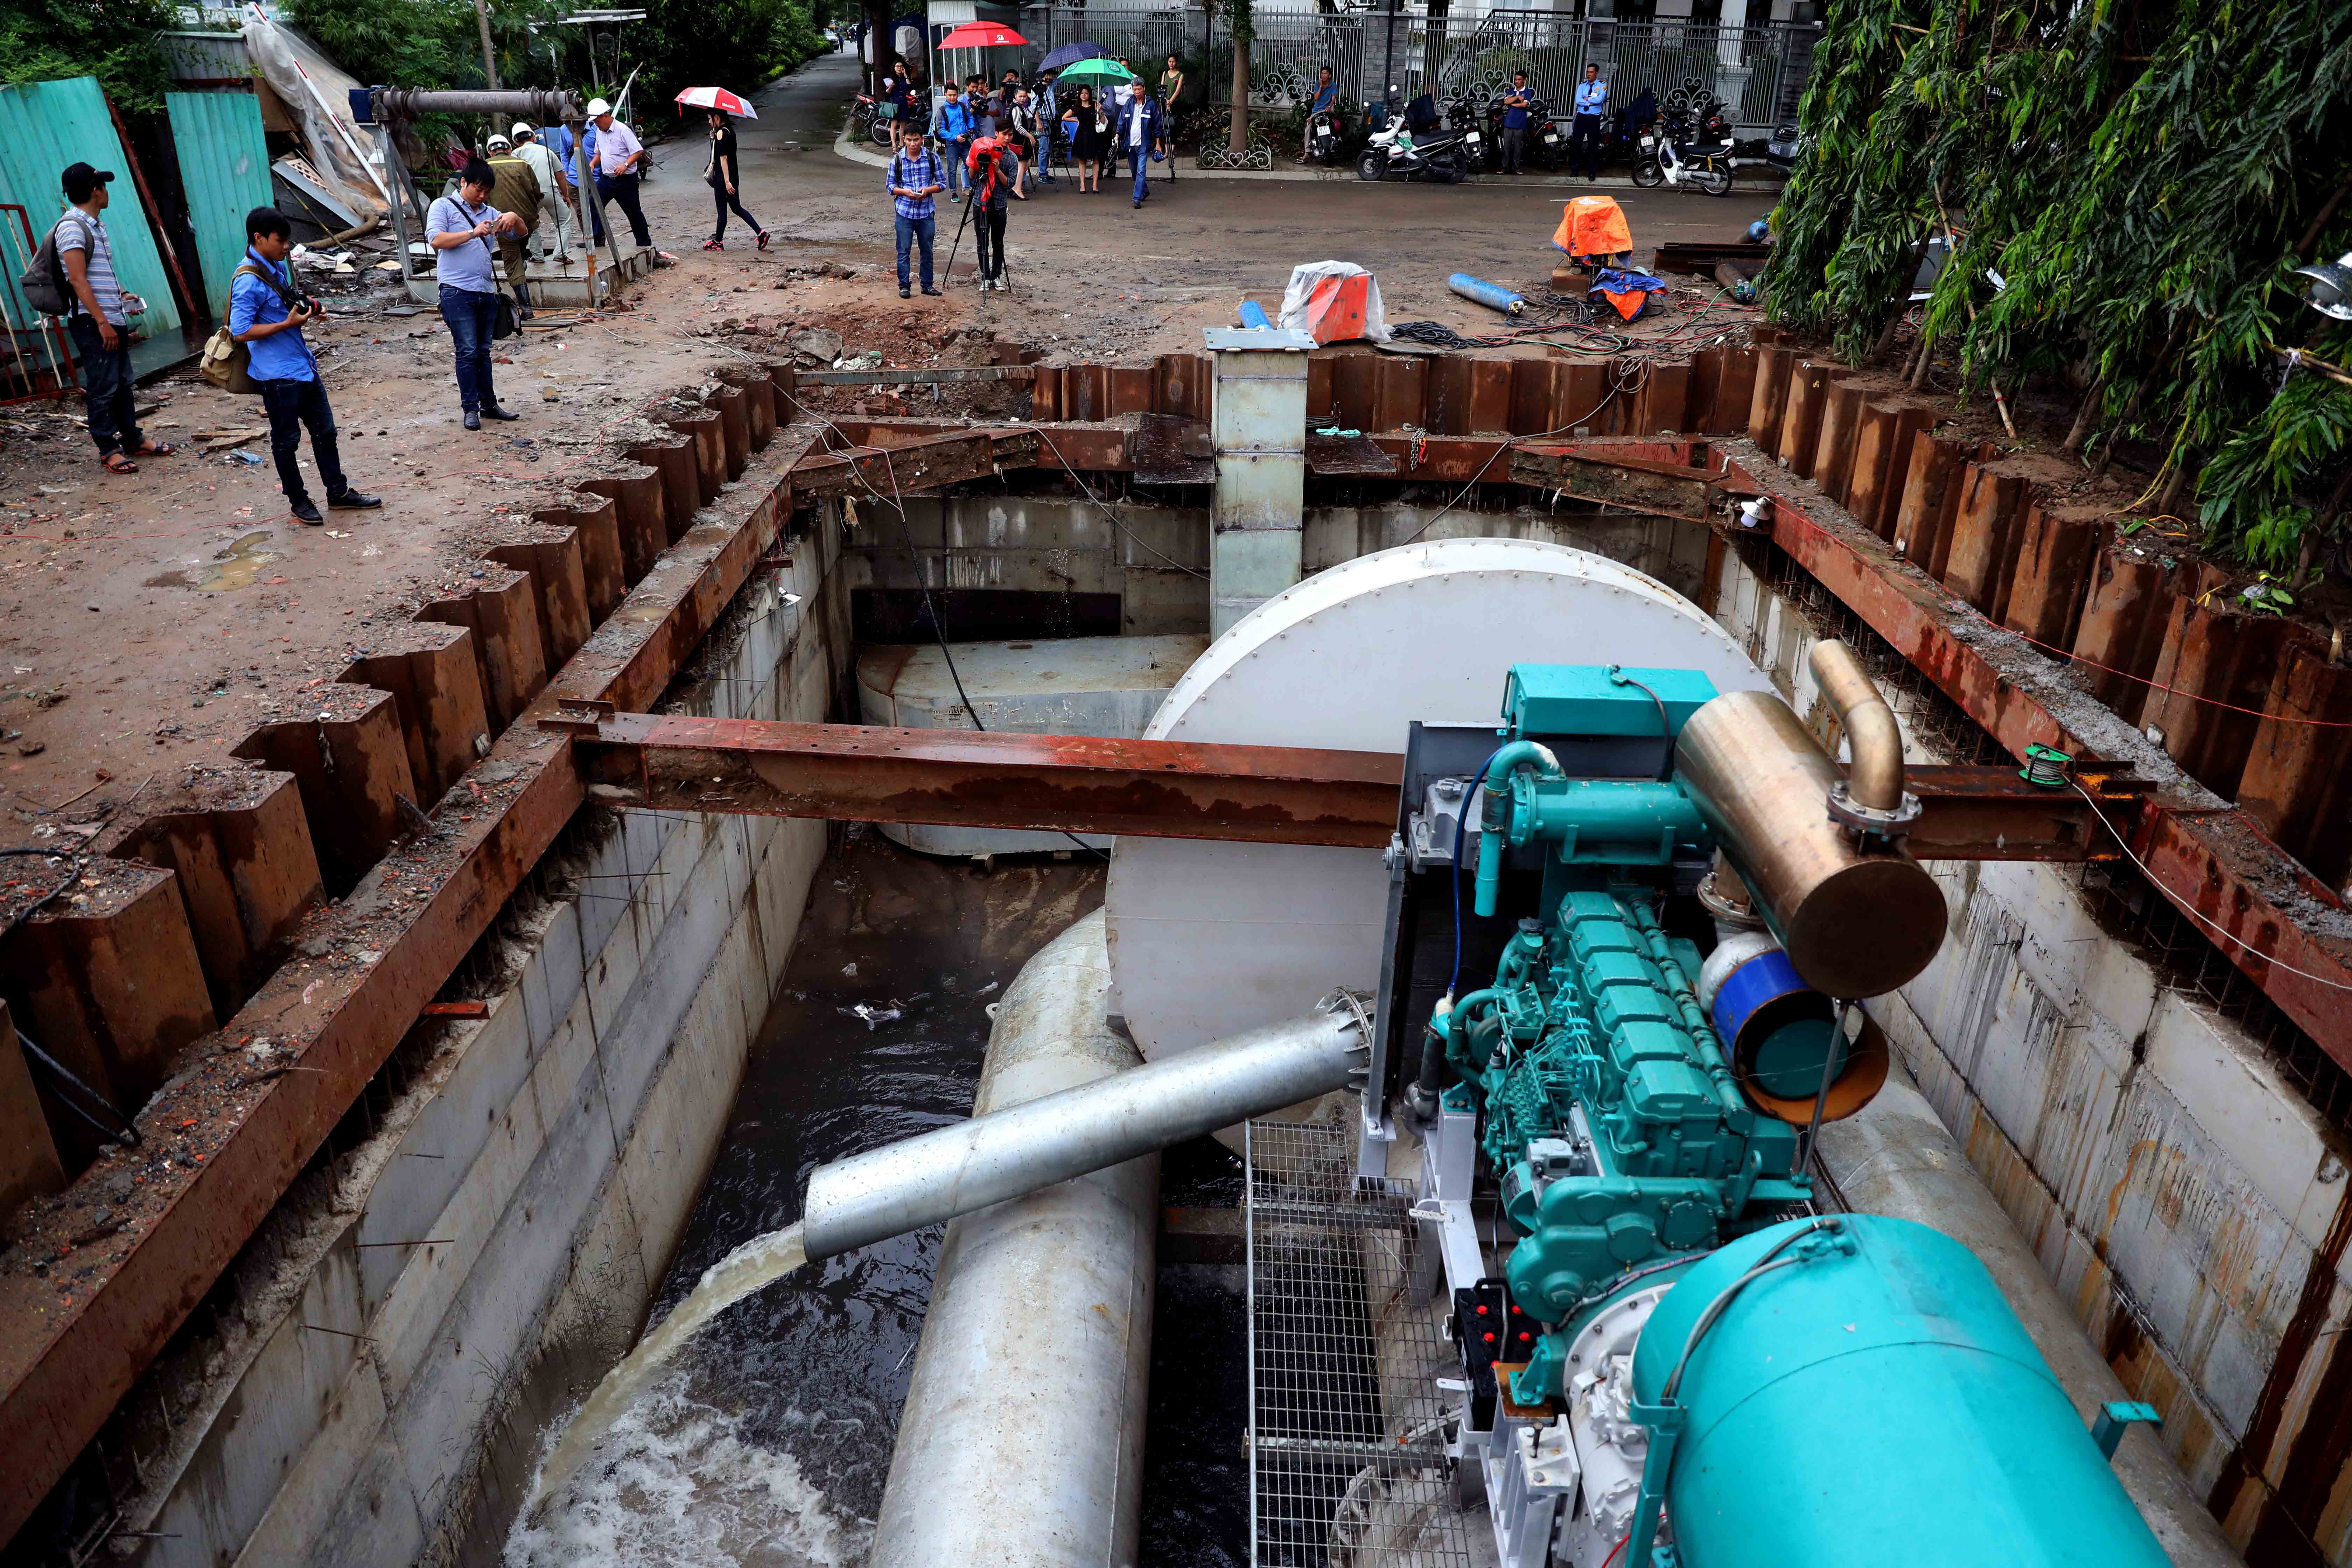 The powerful pump system on Nguyen Huu Canh Street